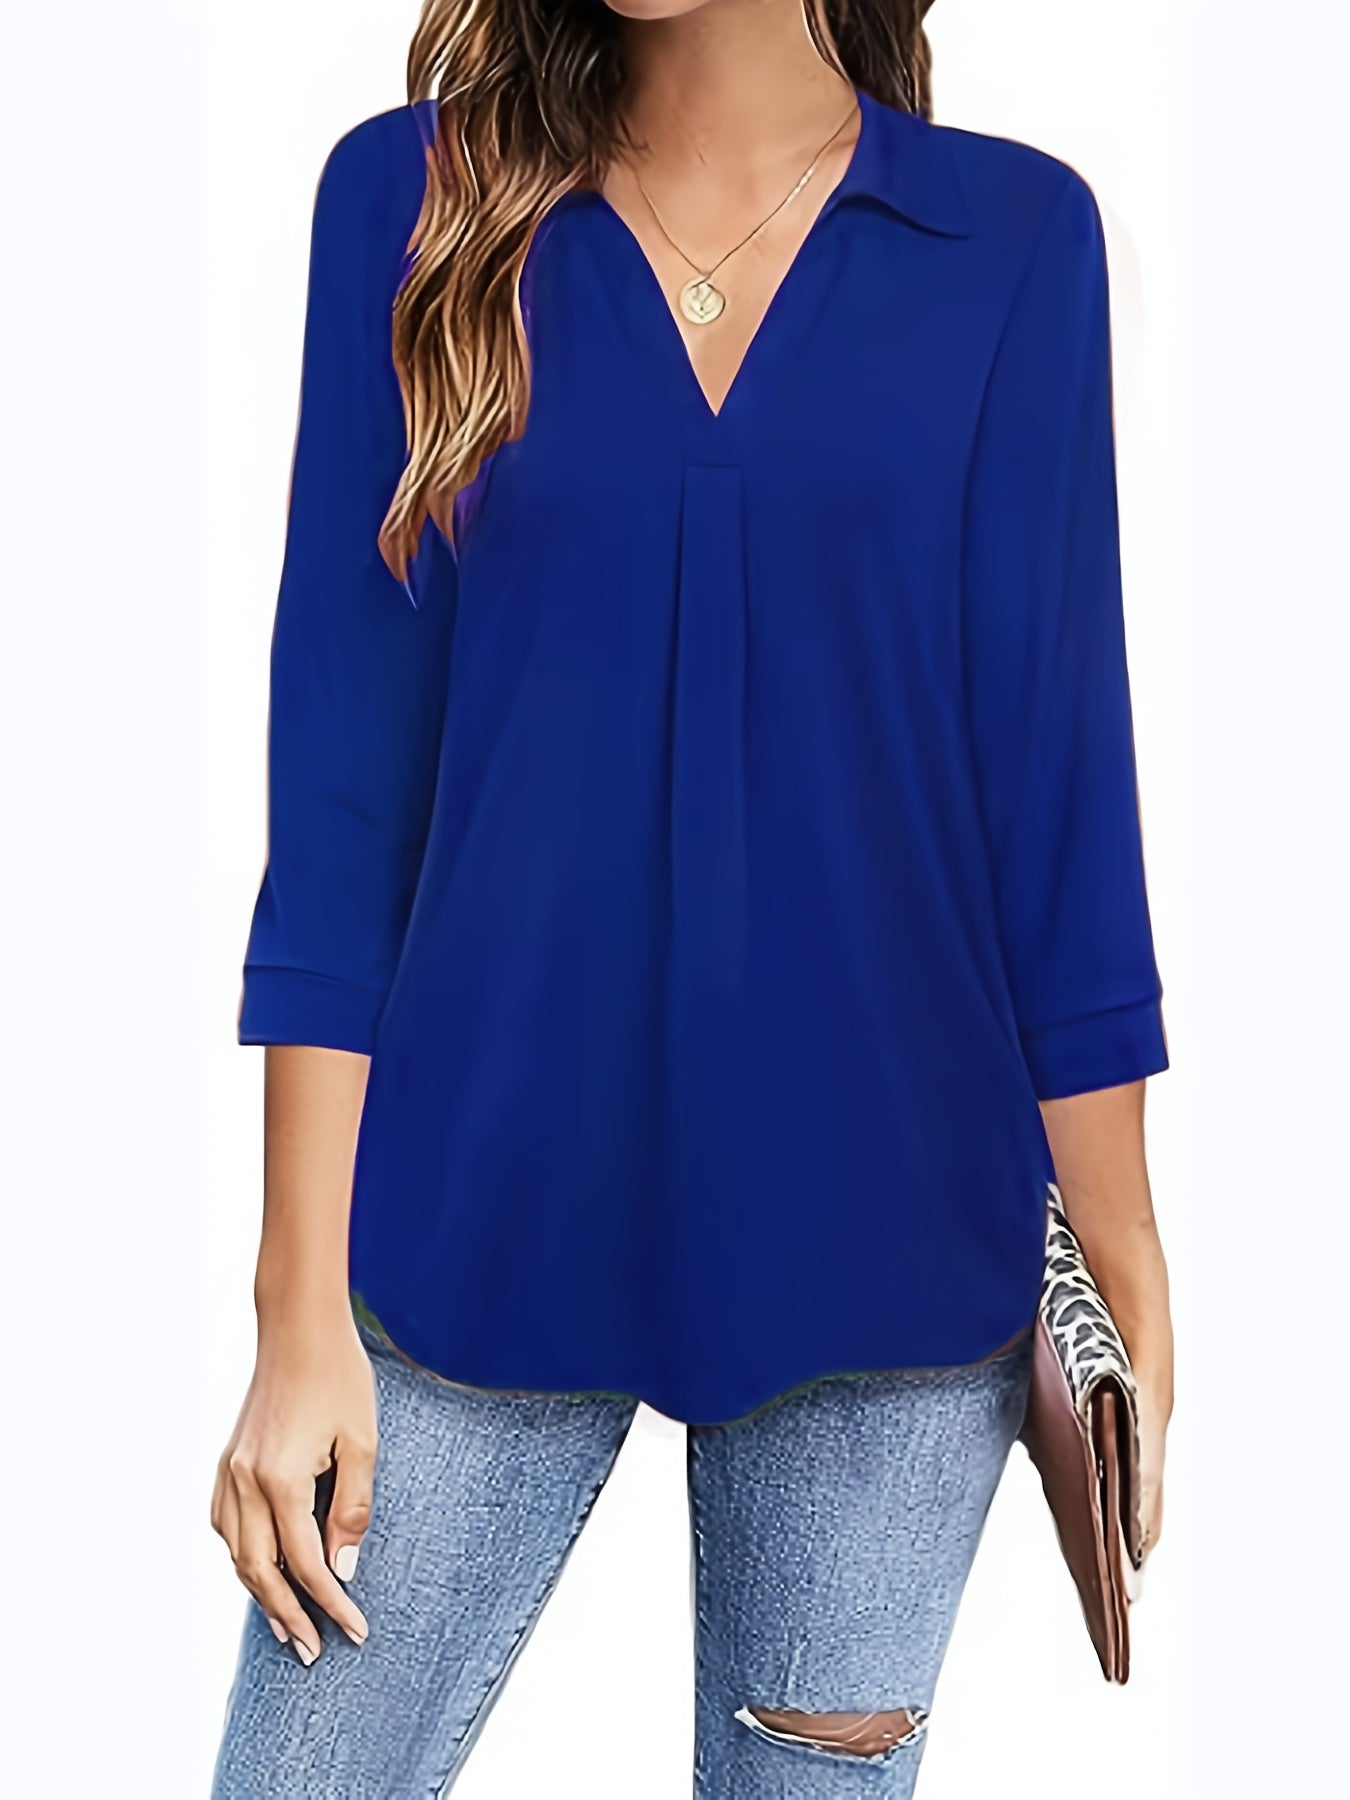 Plus Size Casual Blouse, Women's Plus Solid Half Sleeve Turn Down Collar Tunic Top